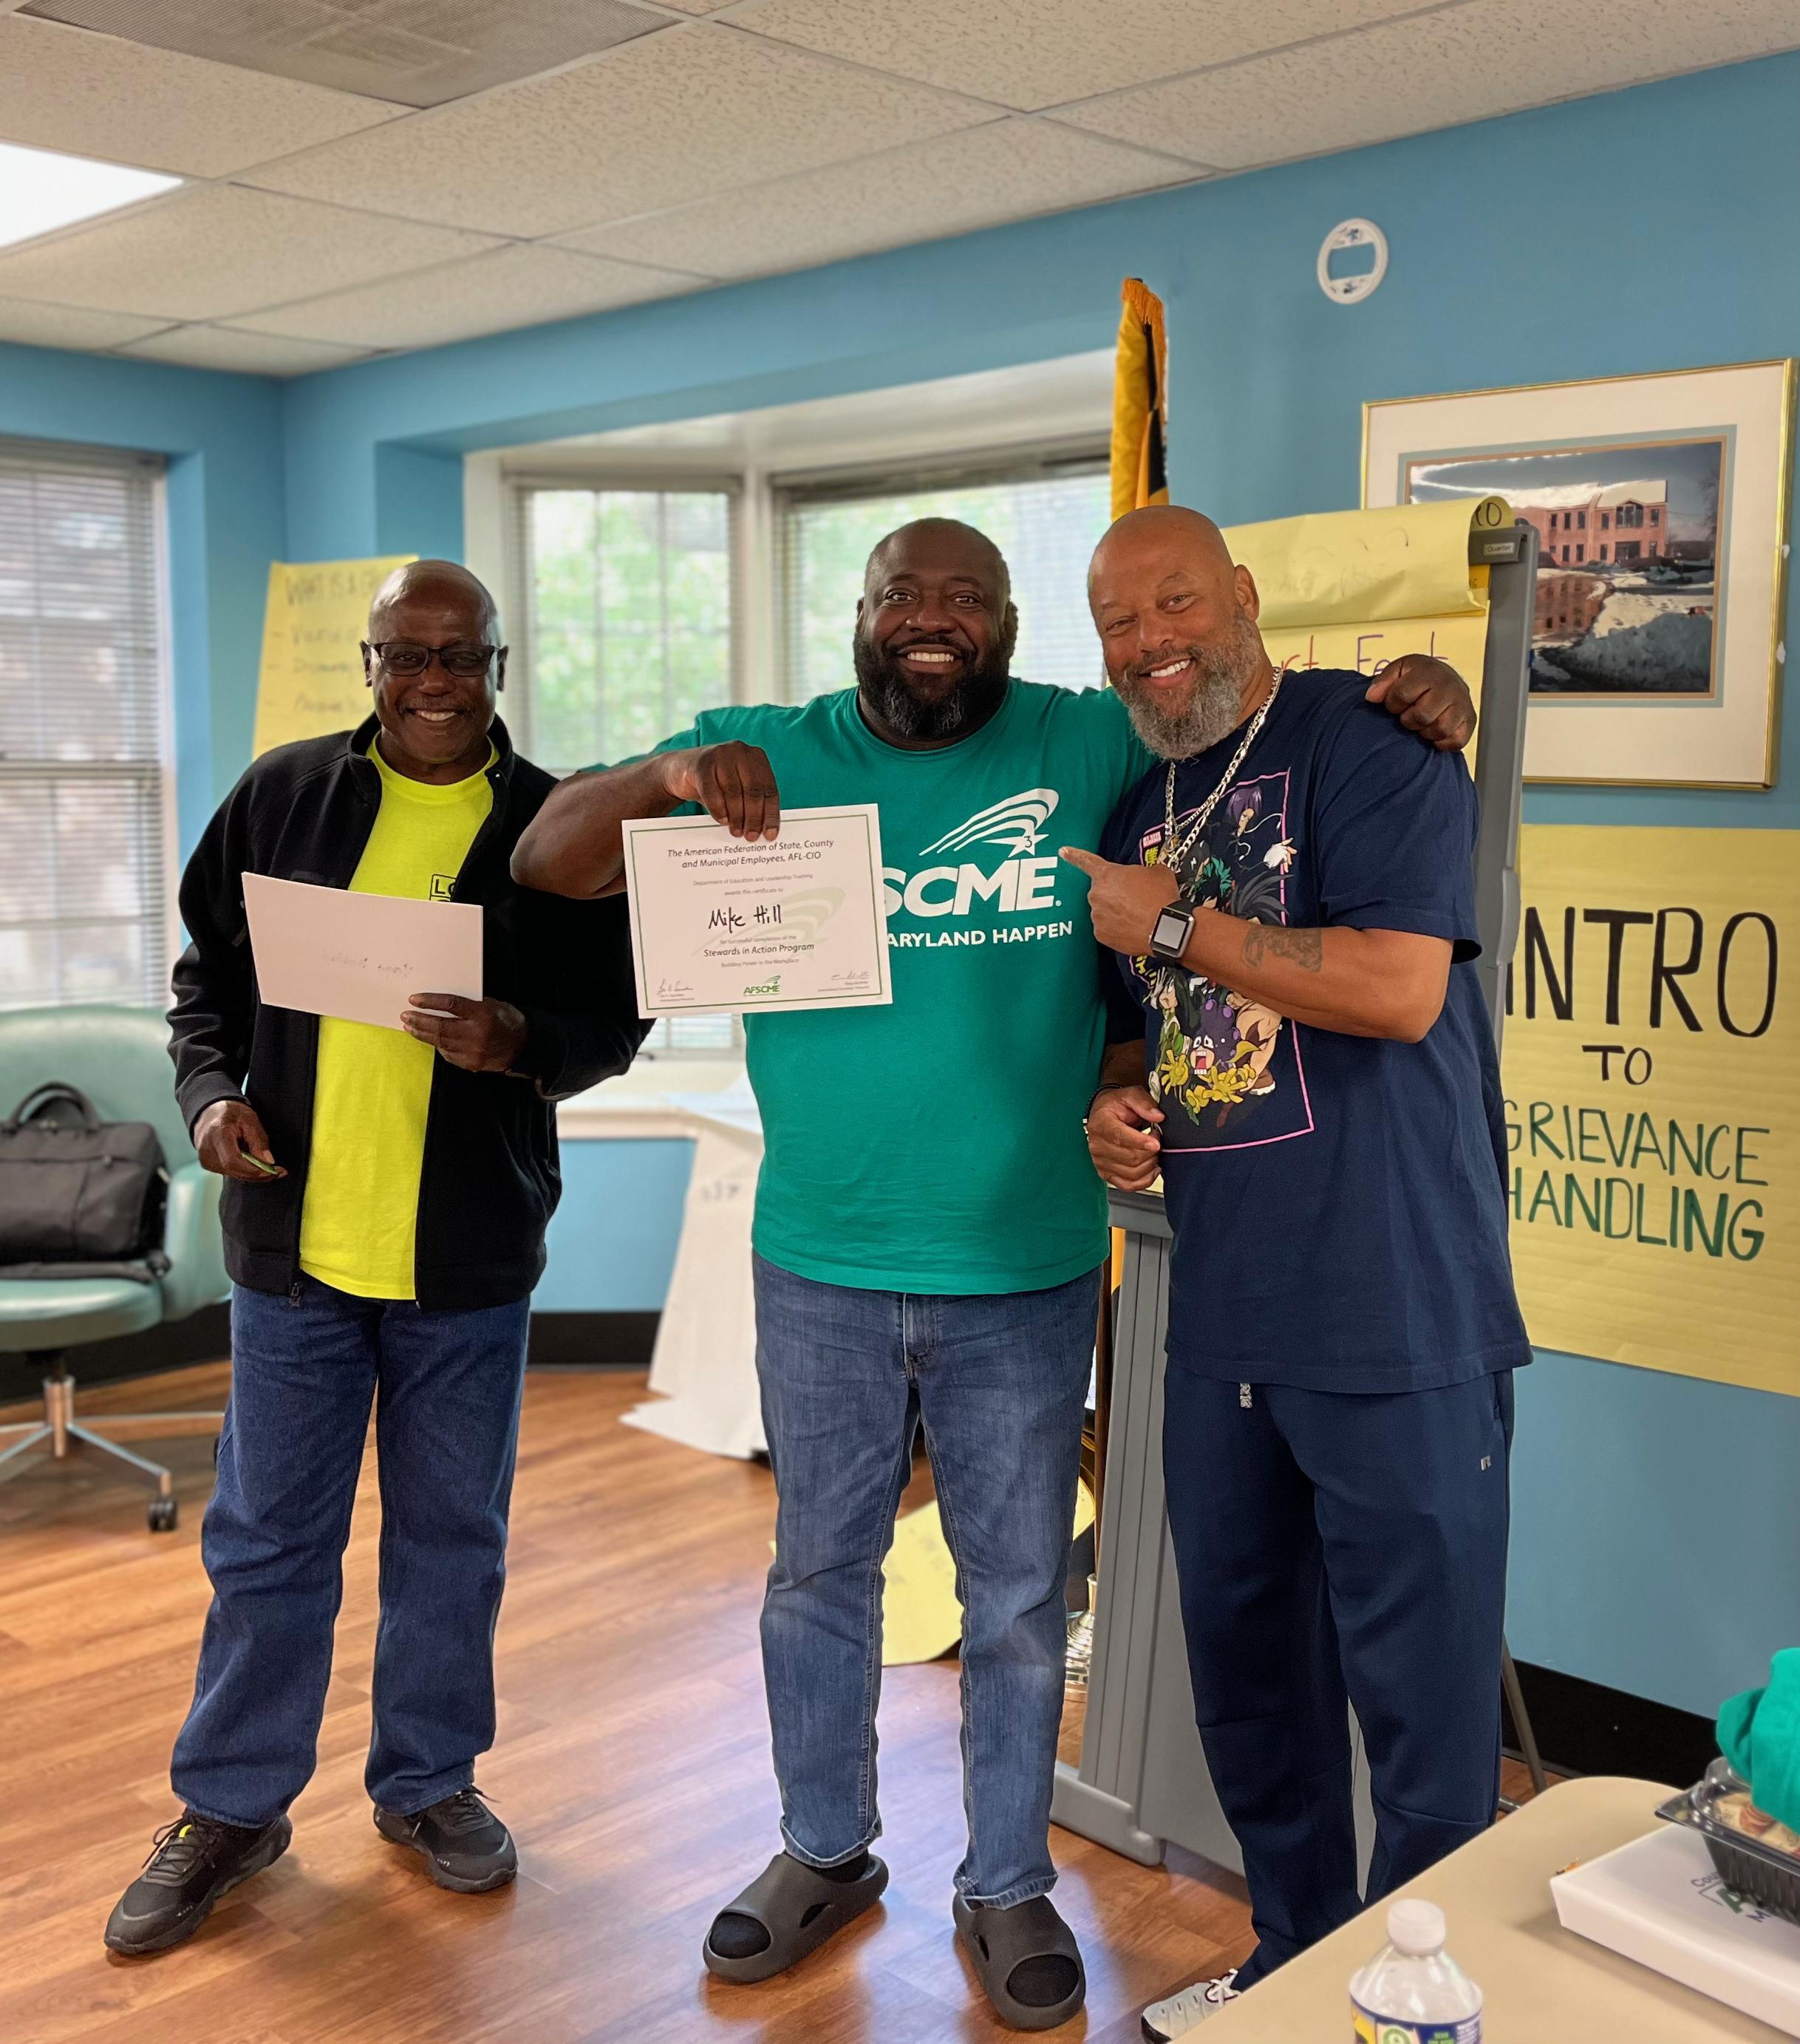 AFSCME Local 2898 Member Mike Hill standing with Local 631 member Kenny Nugent and Local President Wynton Johnson